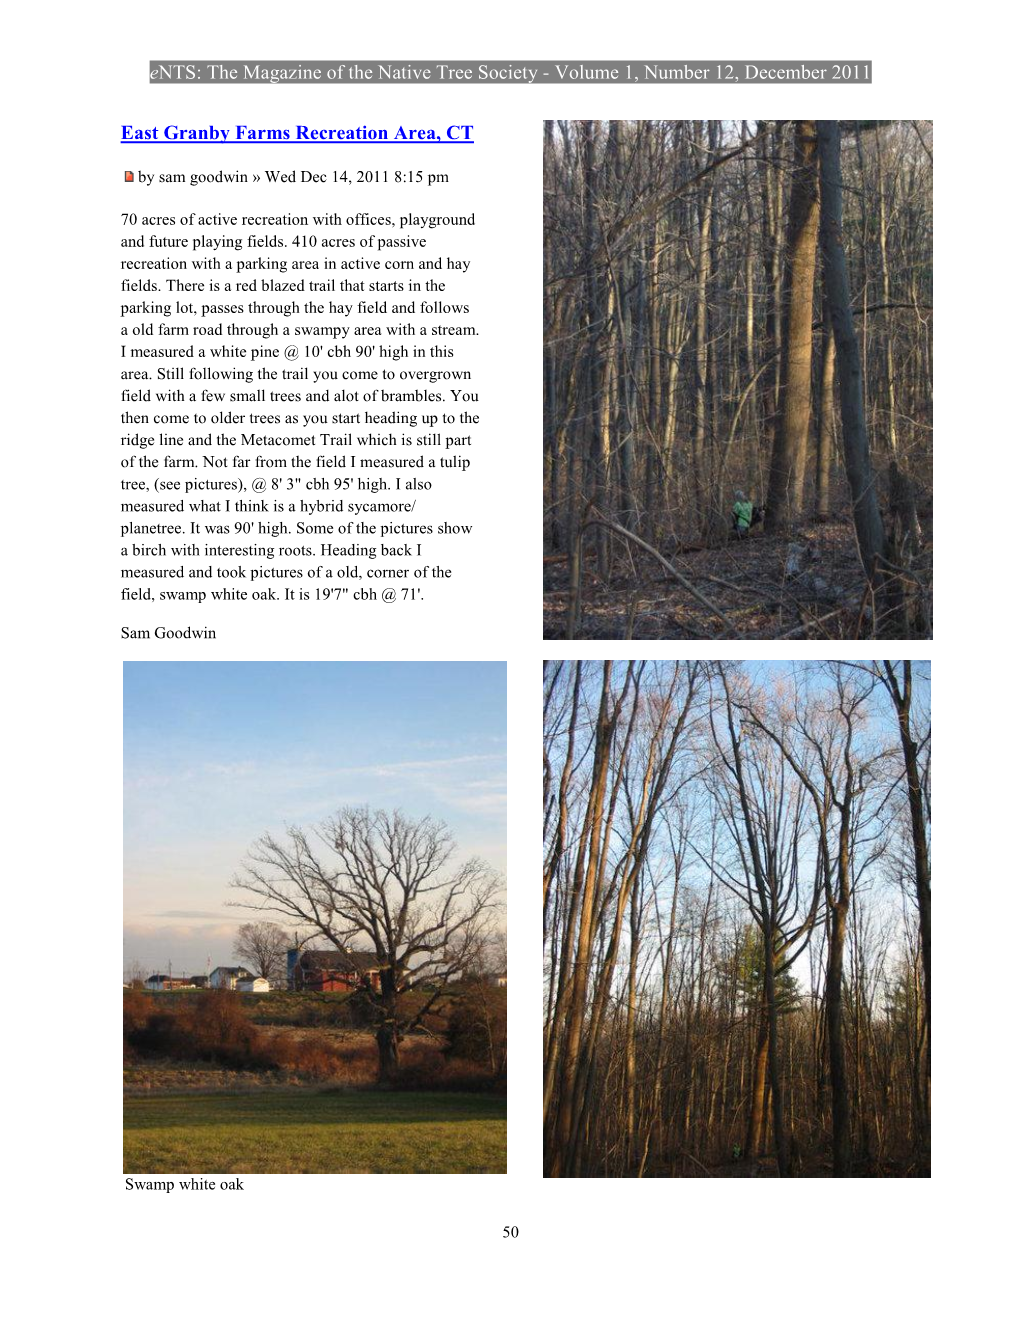 Ents: the Magazine of the Native Tree Society - Volume 1, Number 12, December 2011